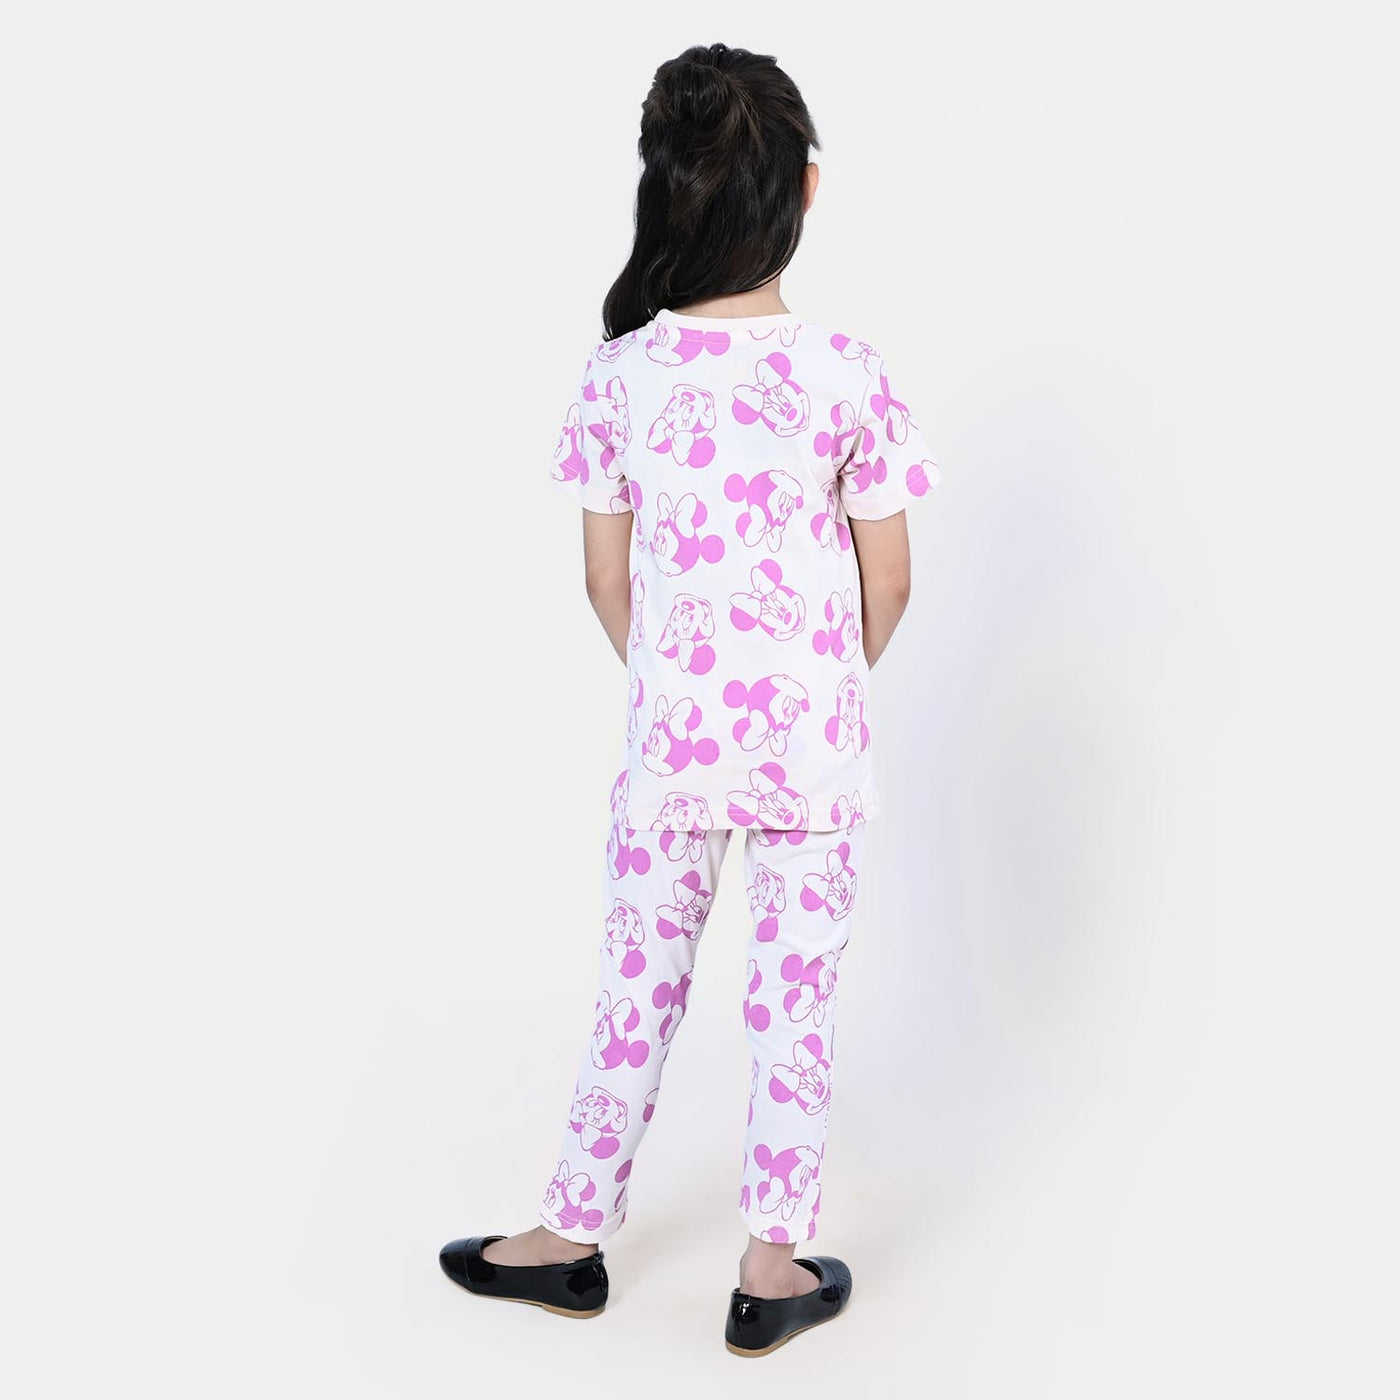 Girls Cotton 2PCs Suit Character - White/Pink